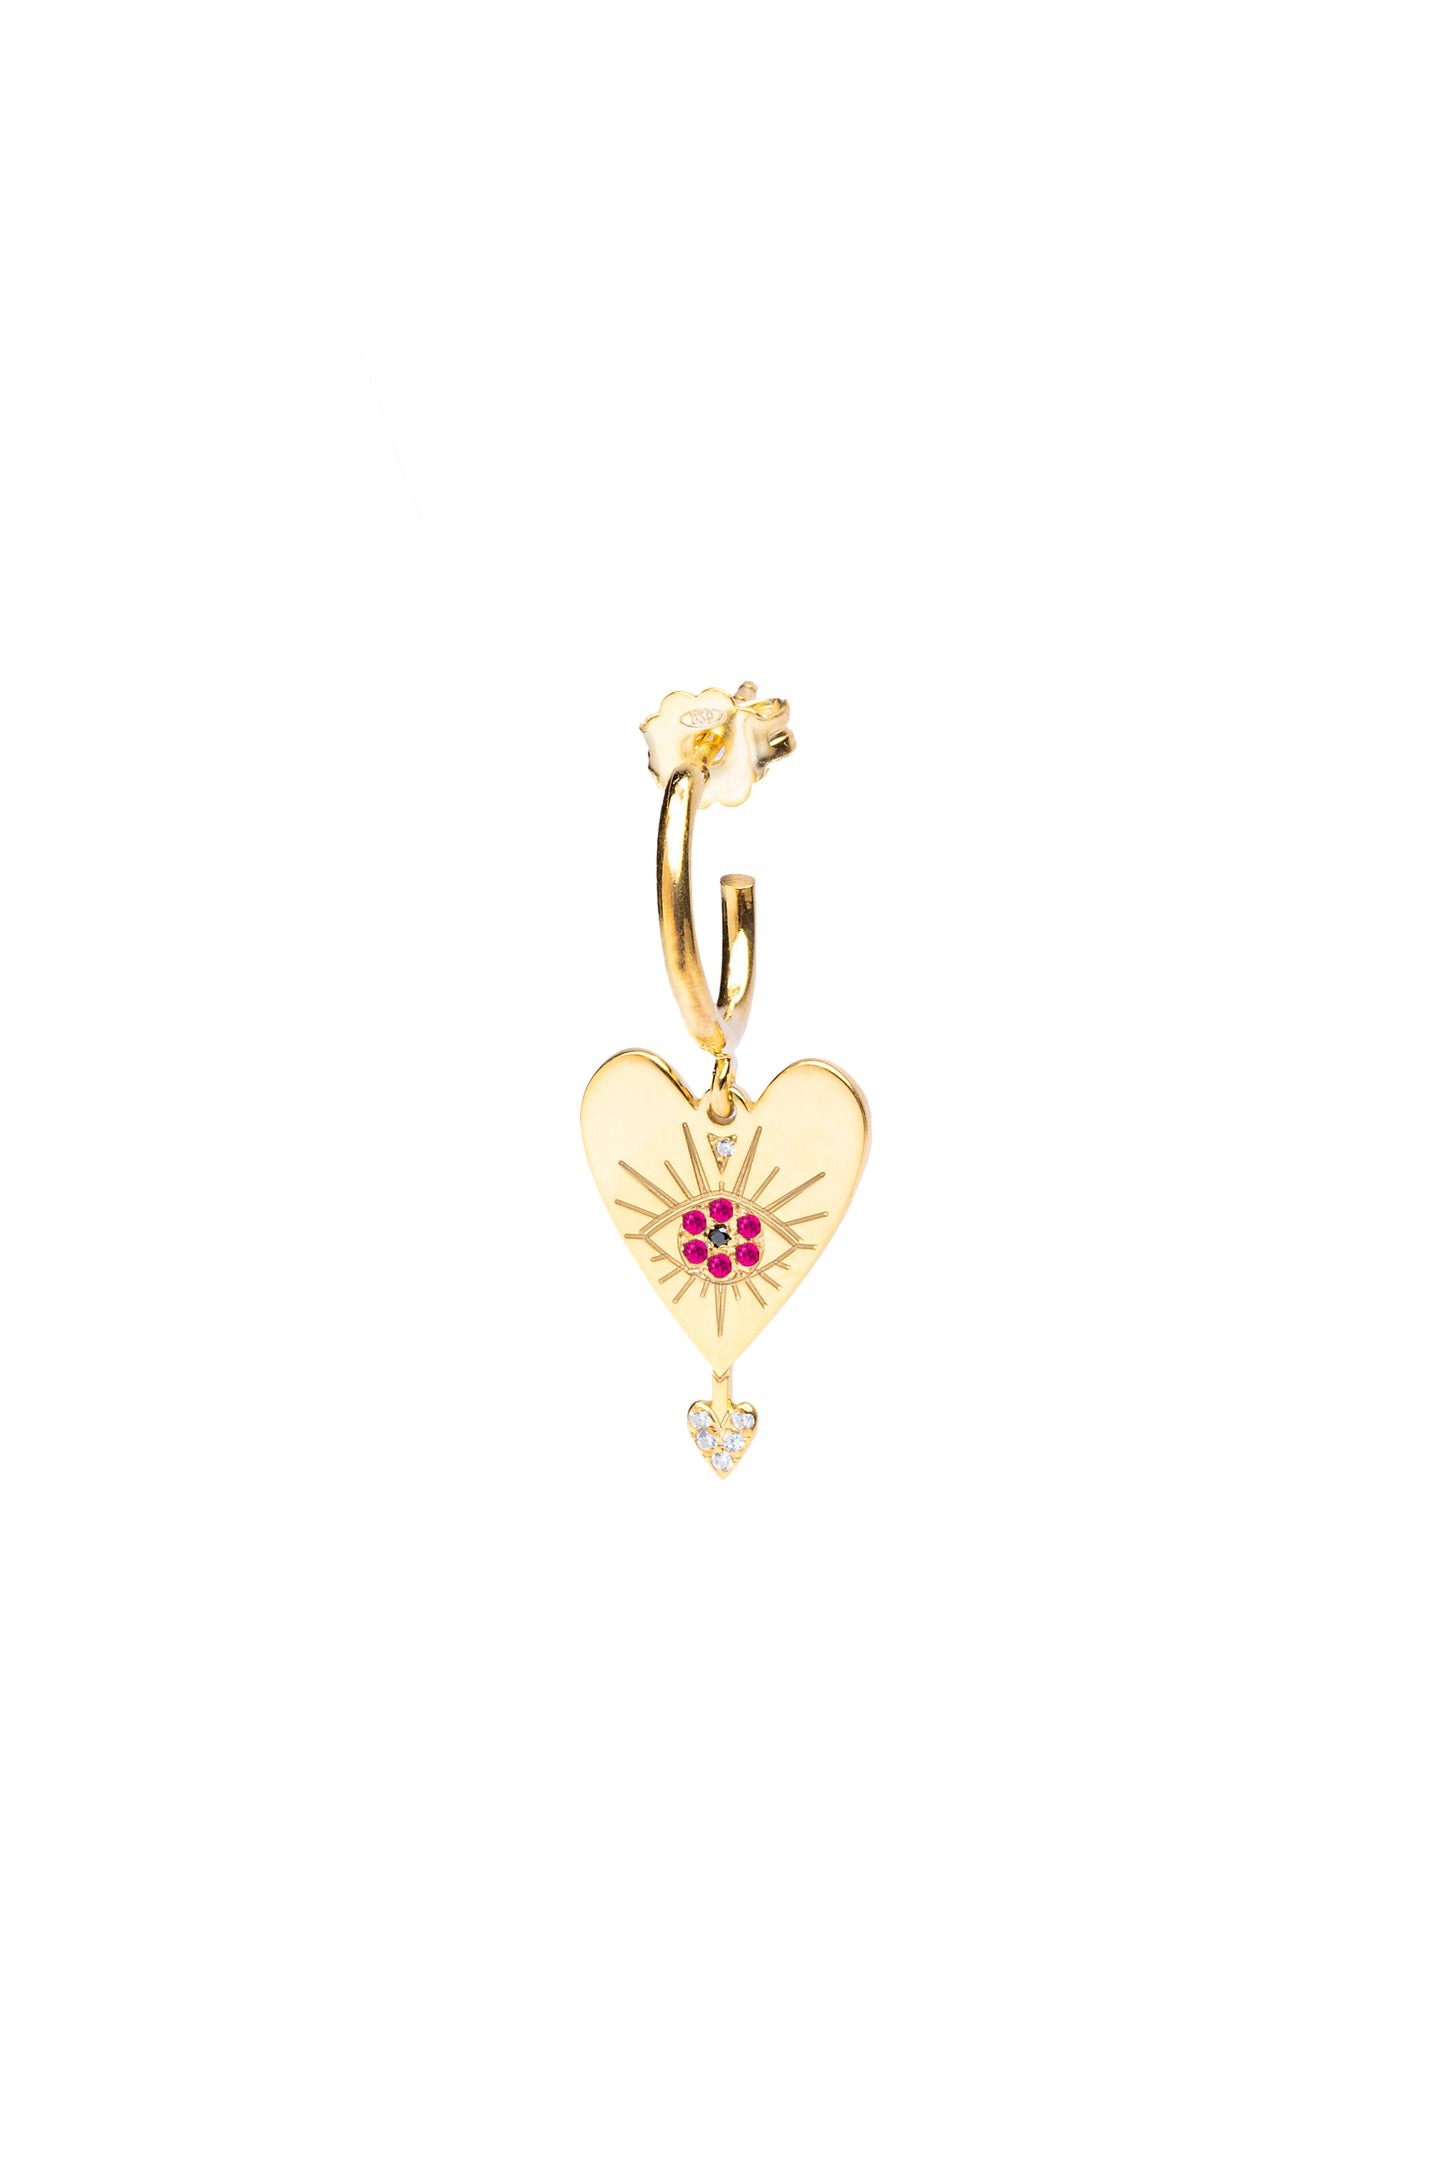 L' amoureux Hoop with Ruby Single Earring- Gold Plated